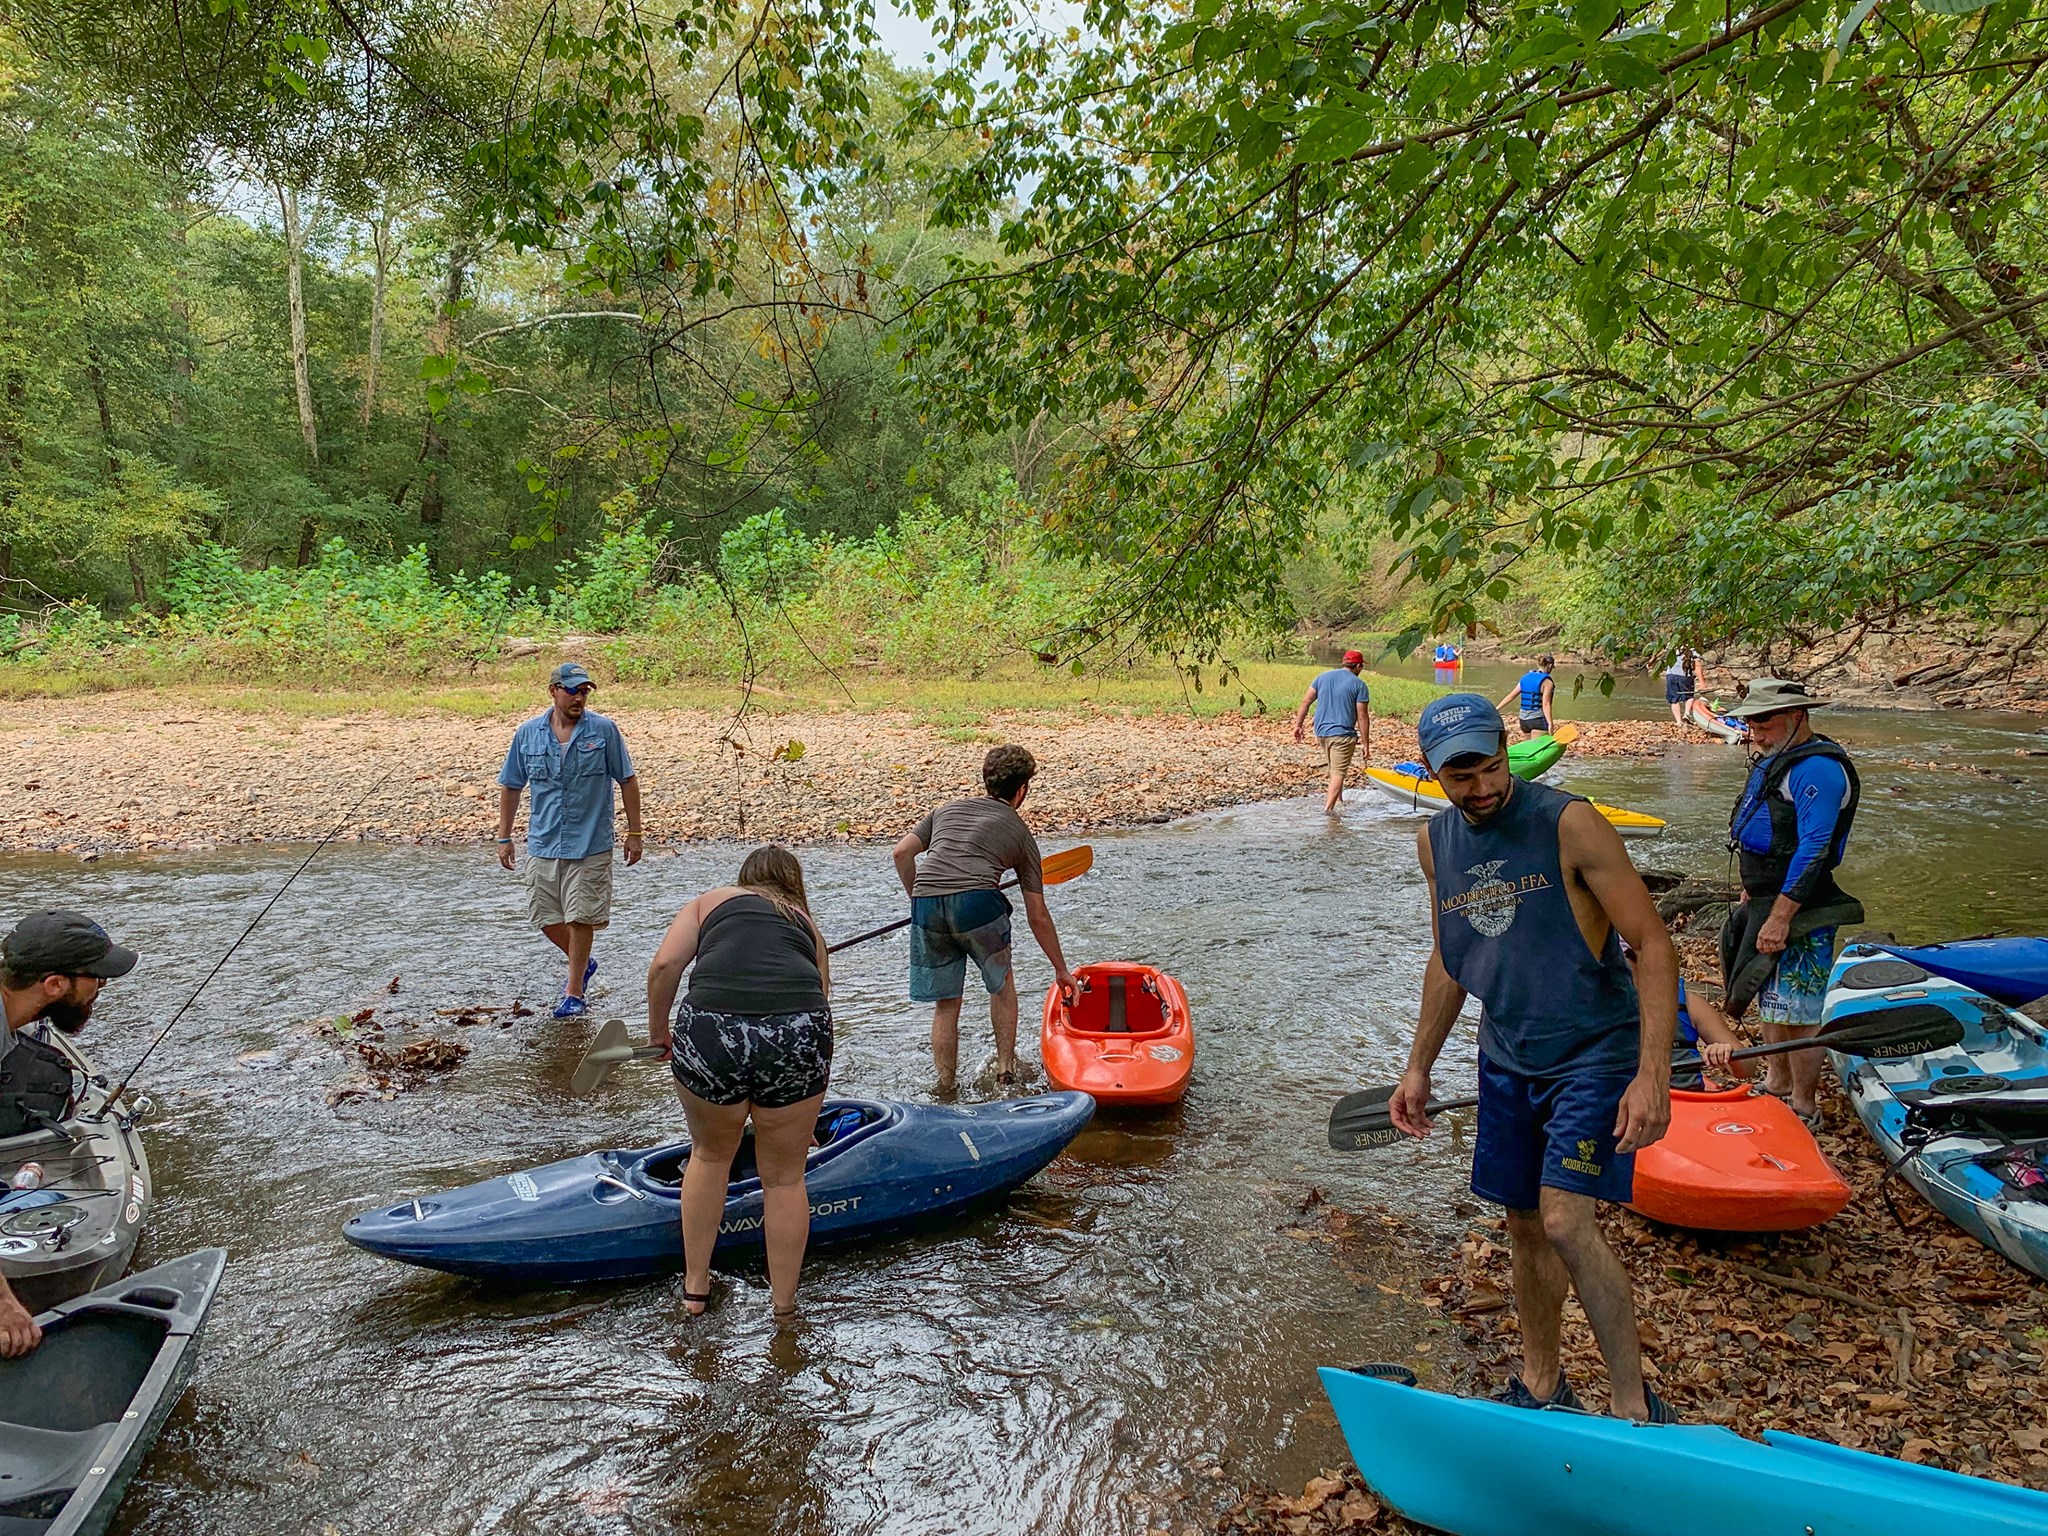 Students are busy putting kayaks into a placid river. The GSC student activities group often leads outdoor excursions.